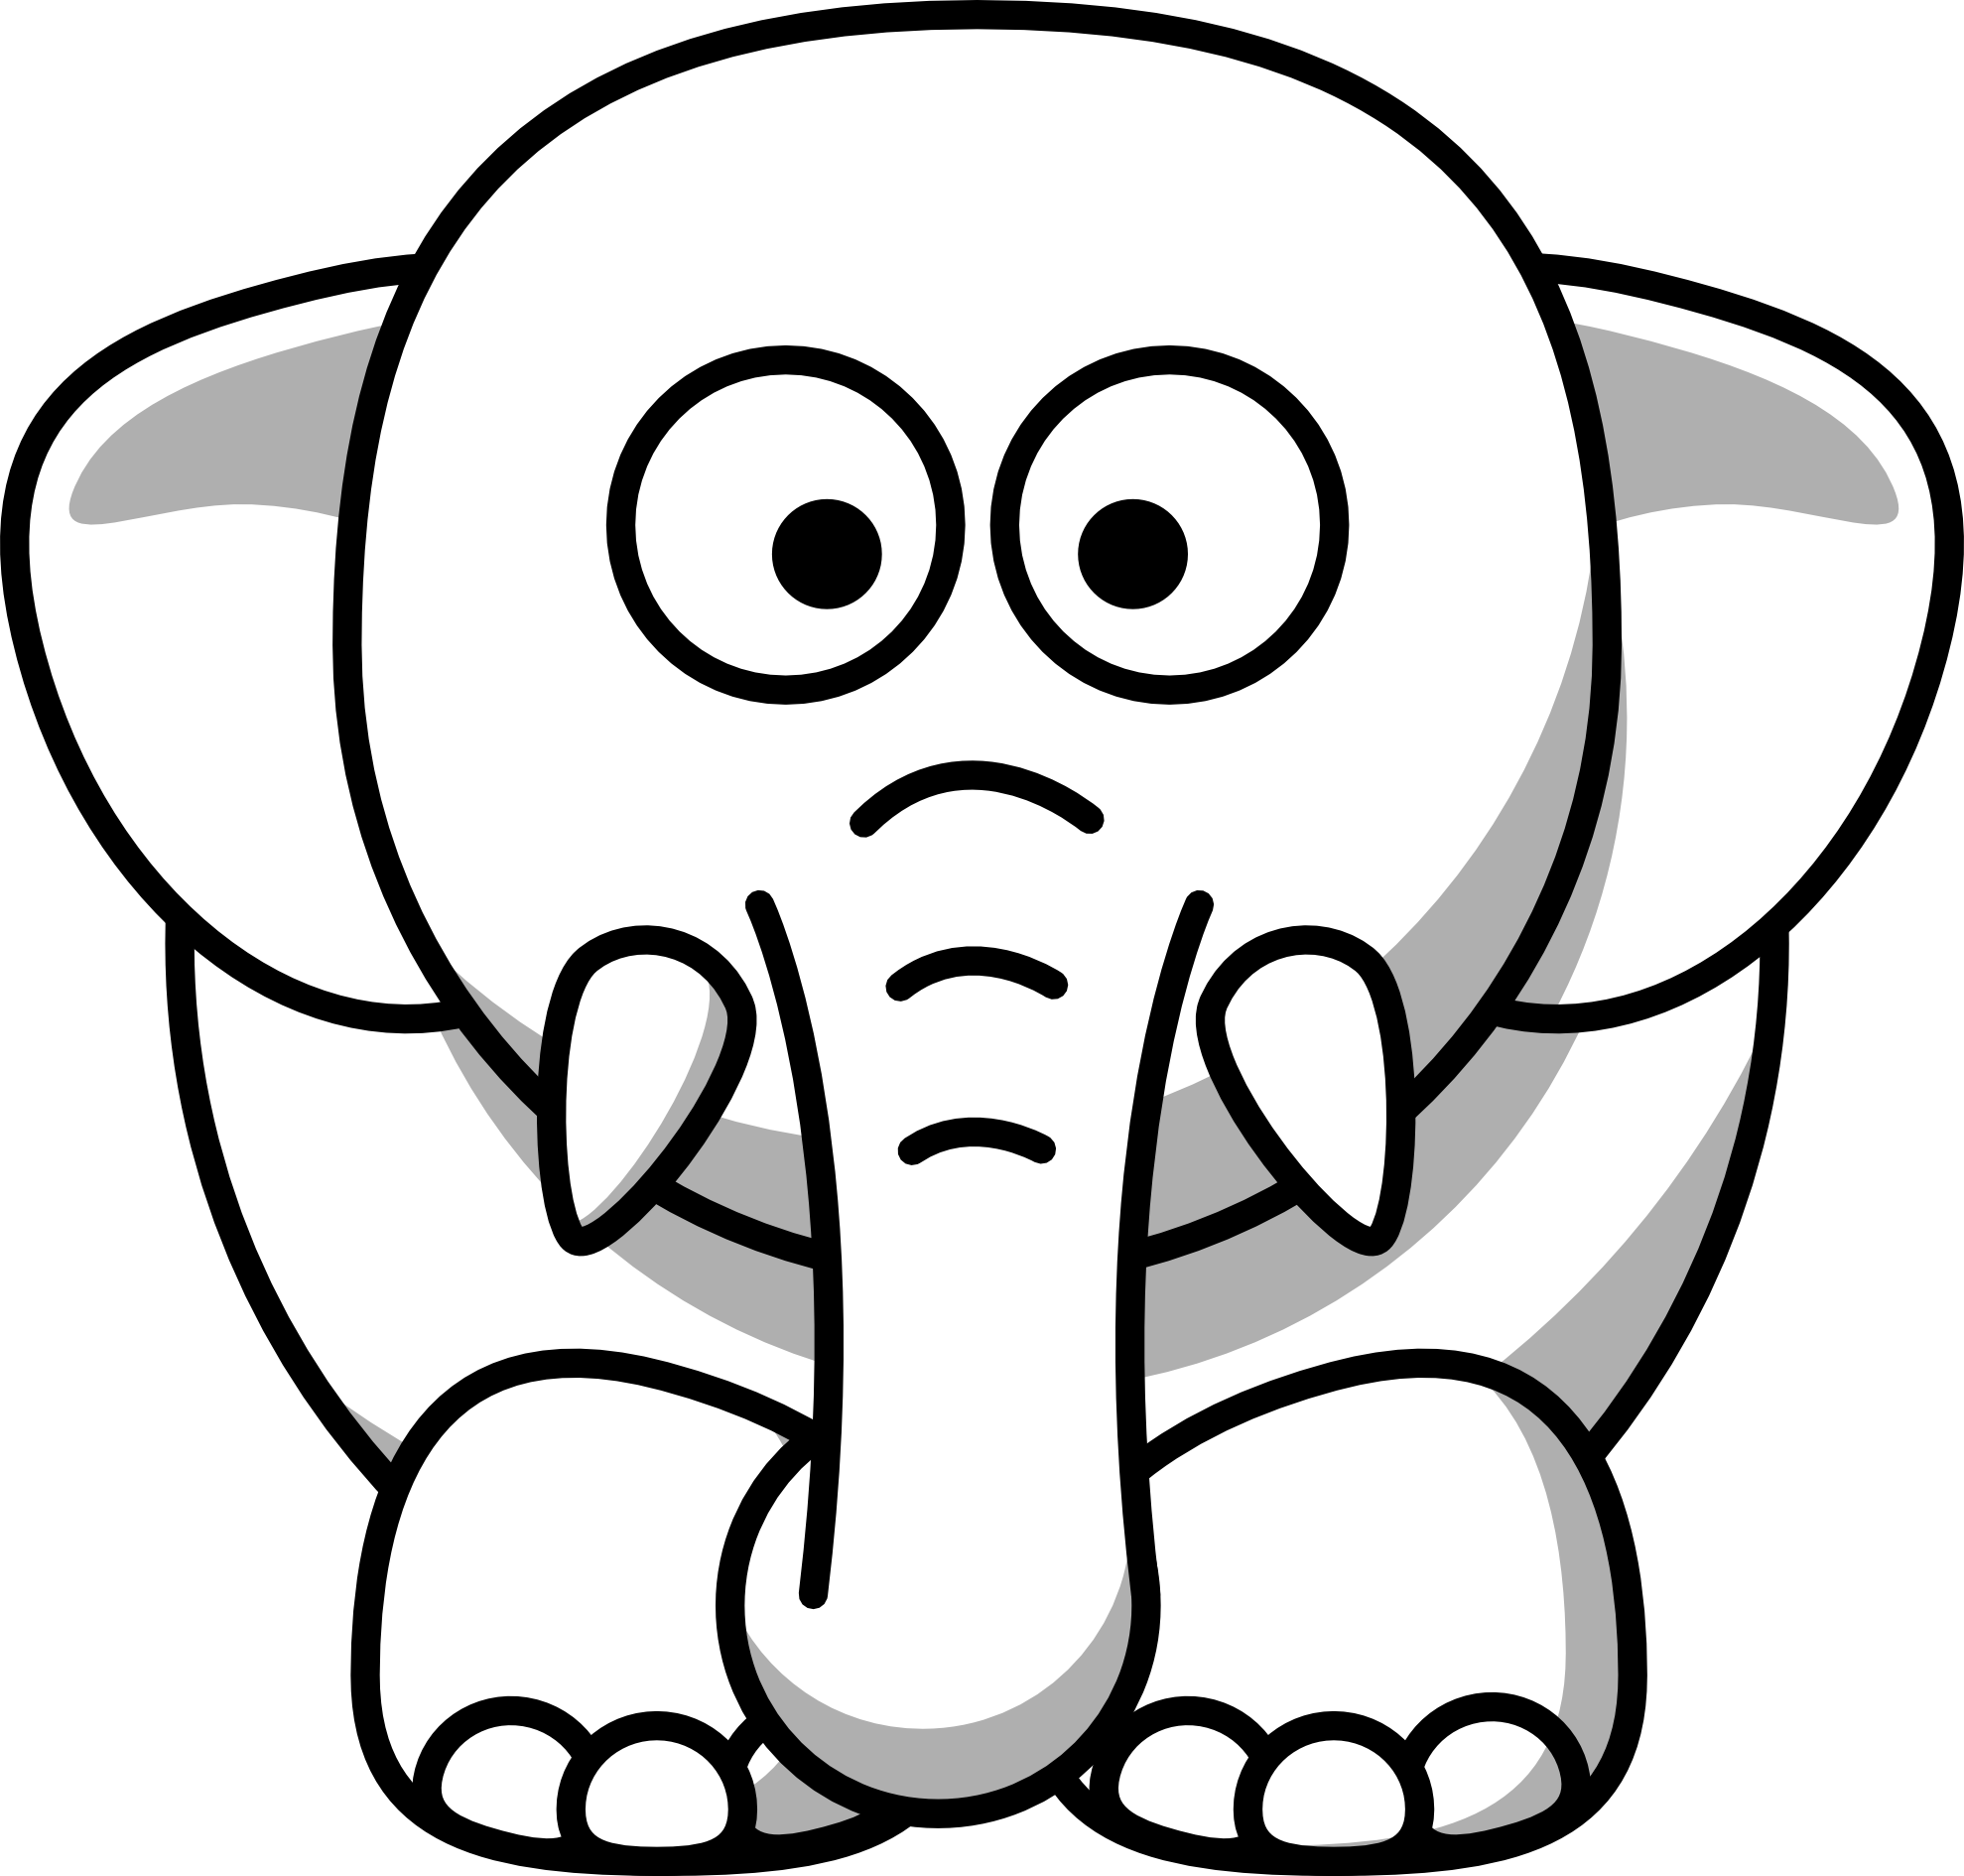 Free White Elephant Clipart, Download Free Clip Art, Free.